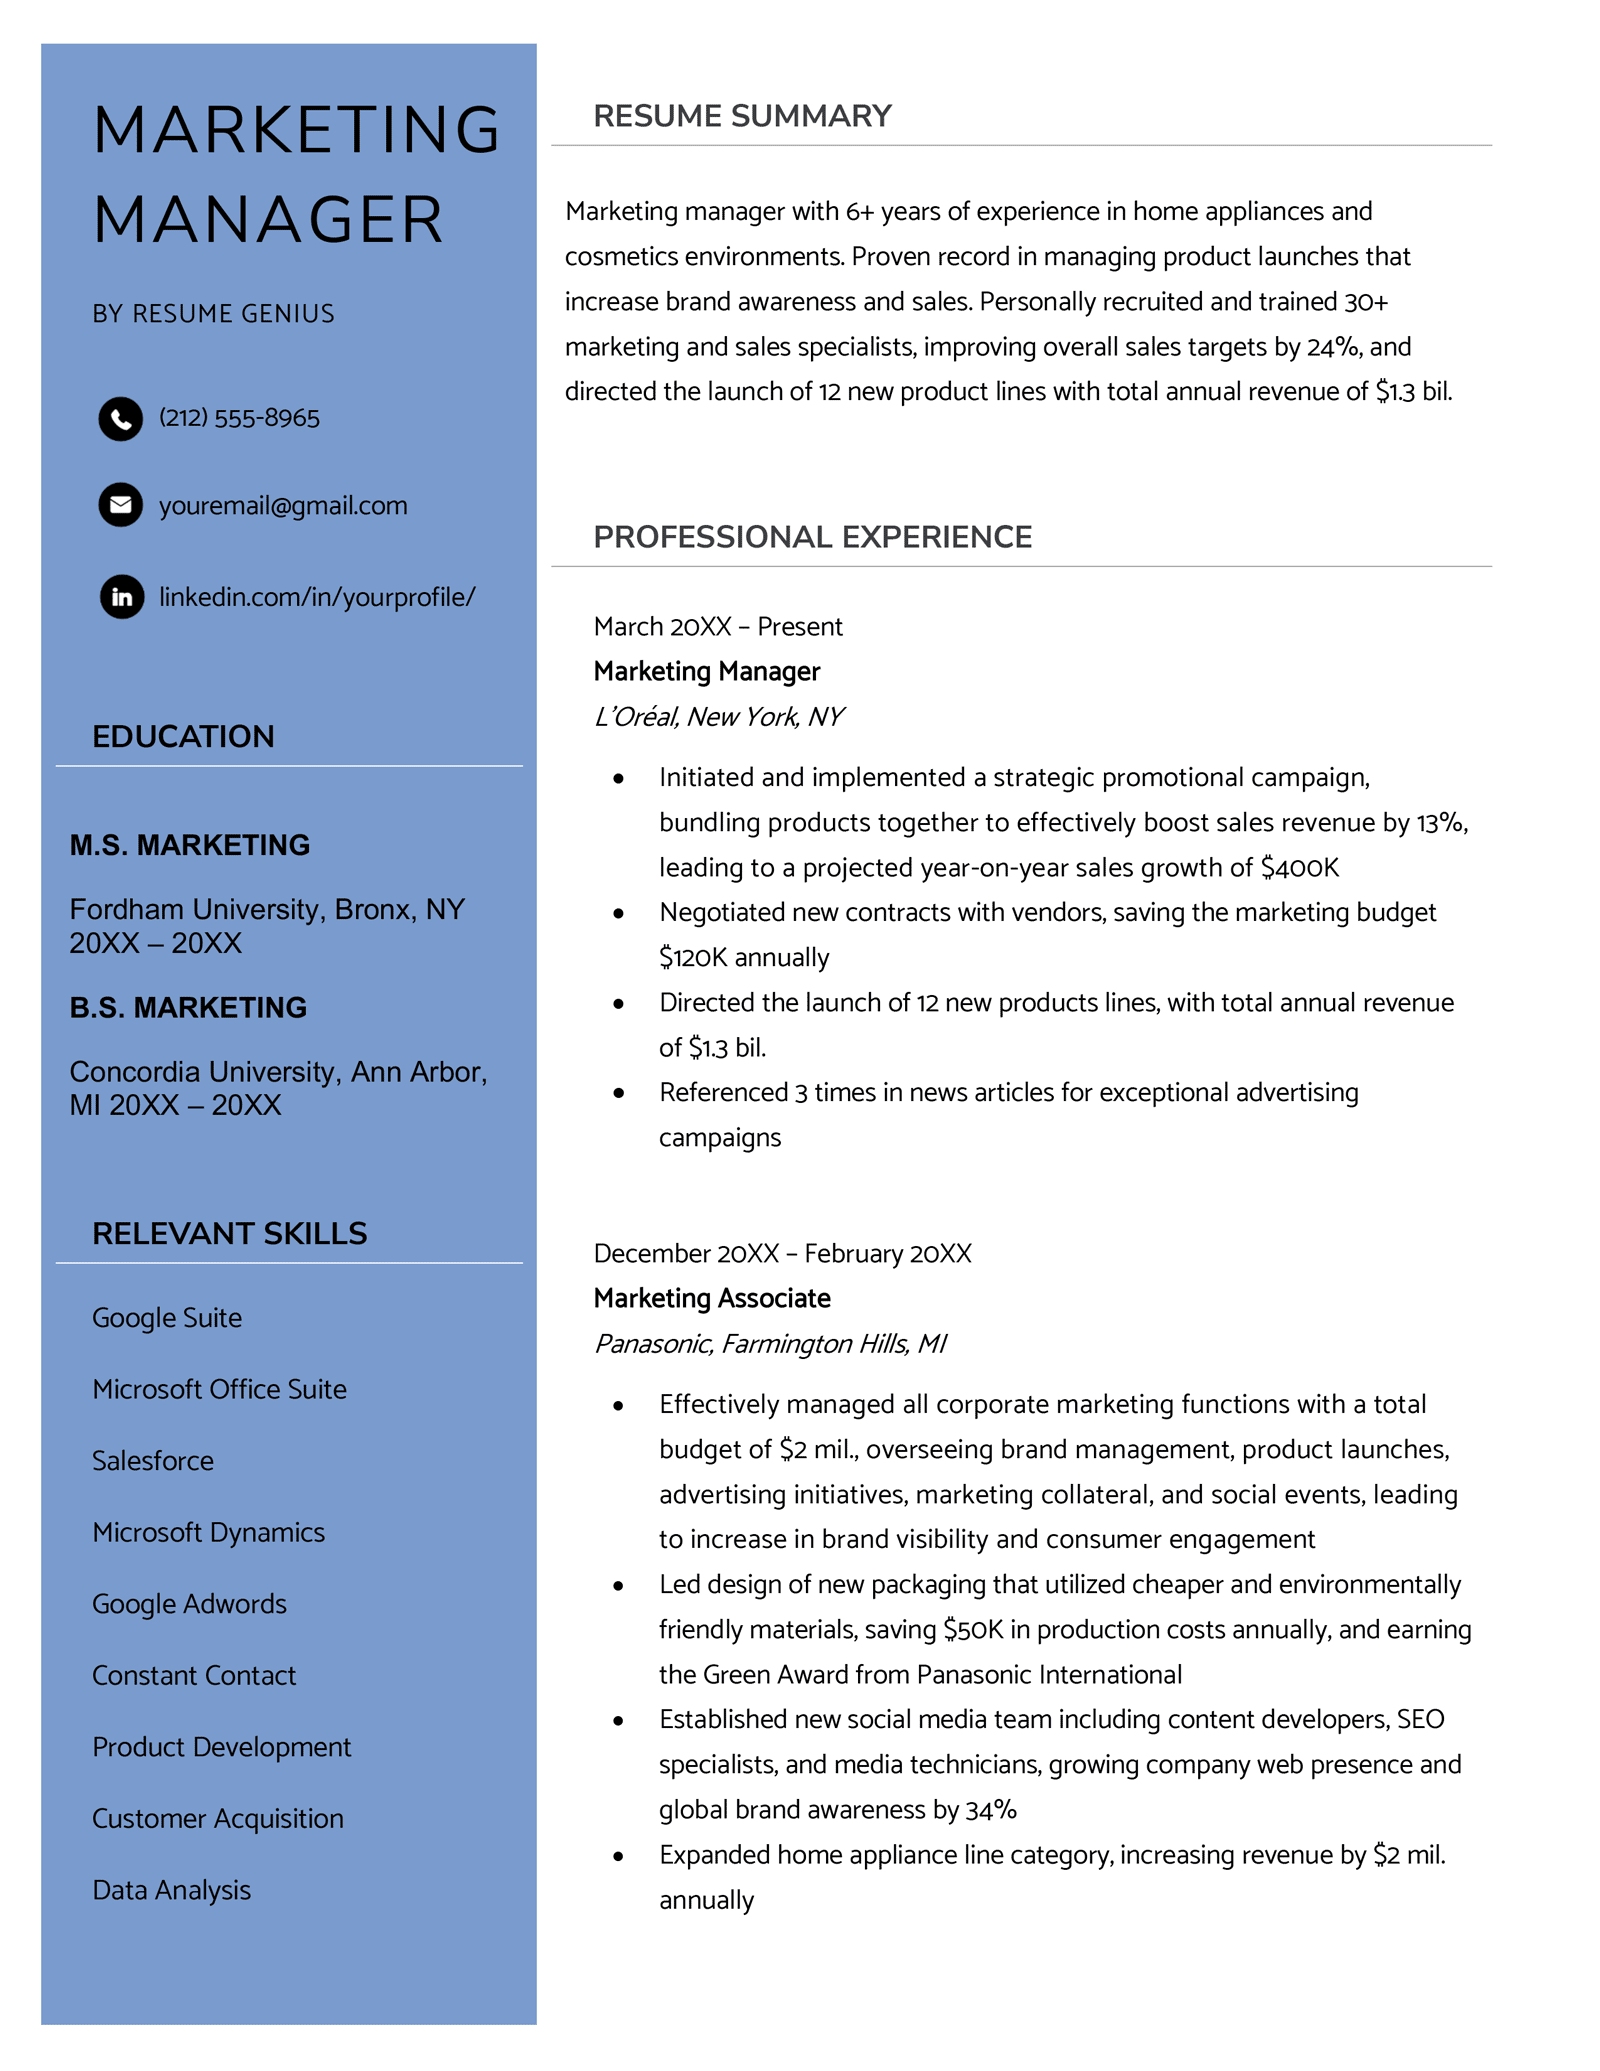 An example of a marketing manager resume